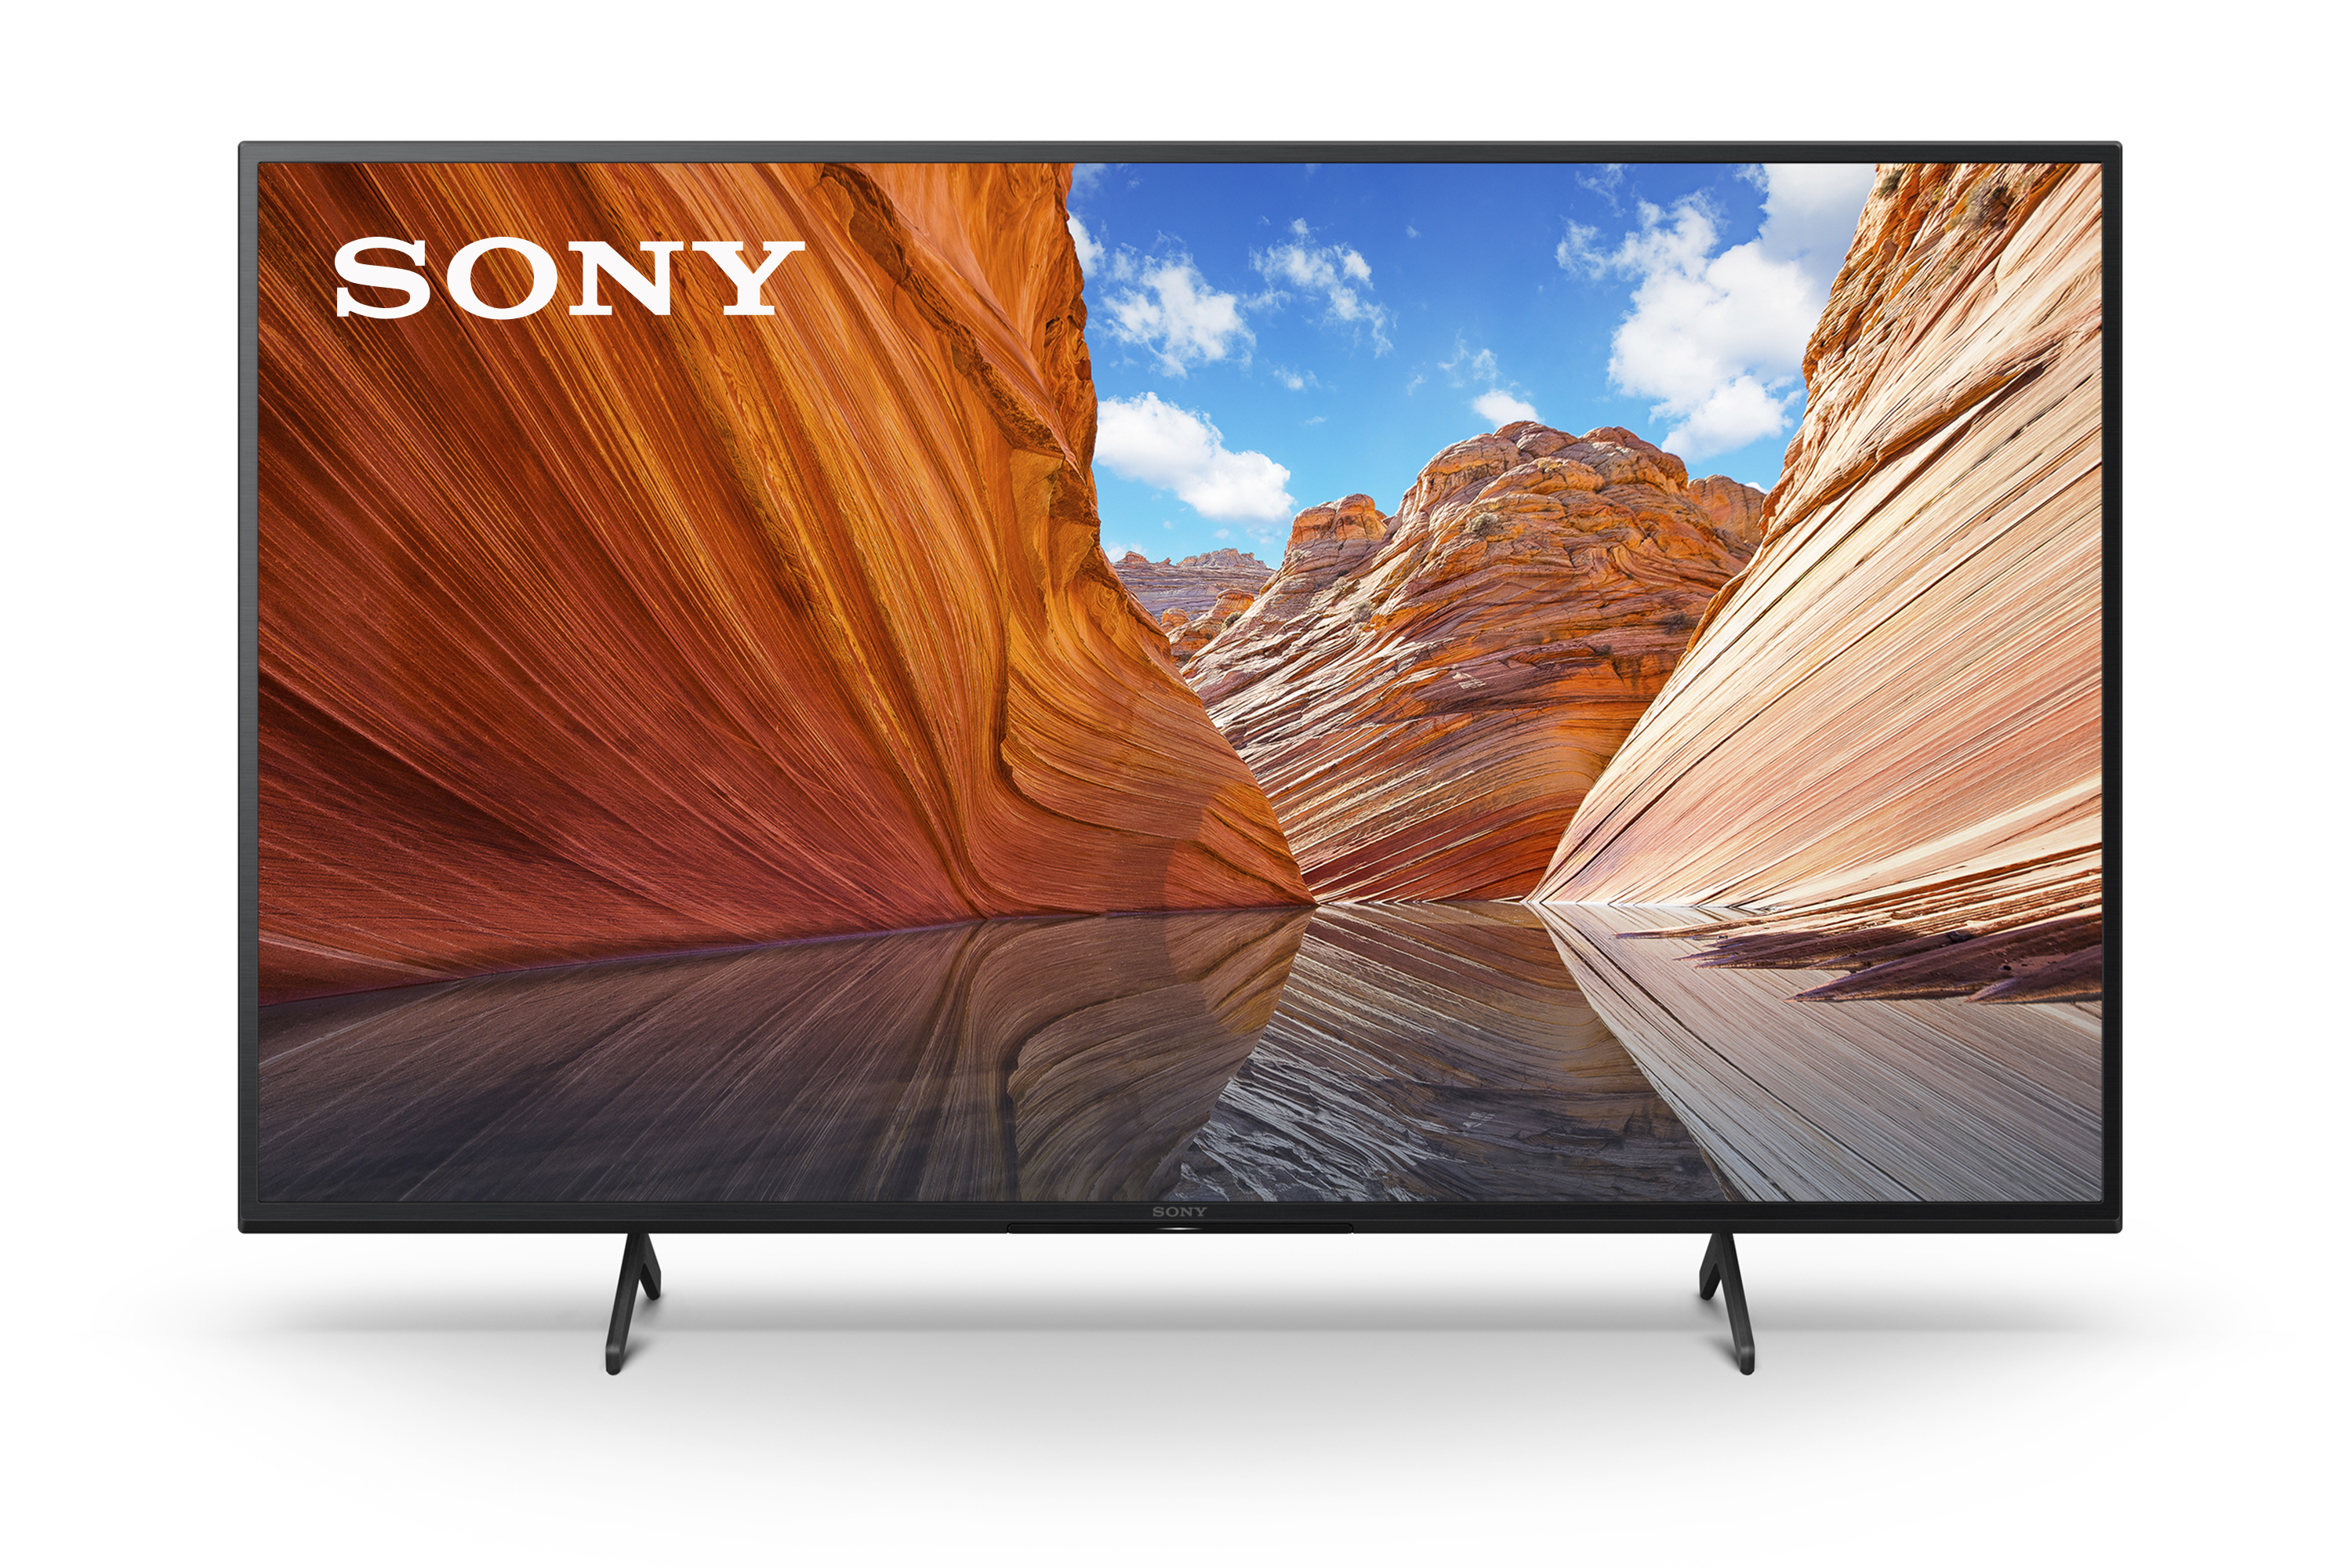 Sony 43" Class KD43X80J 4K Ultra HD LED Smart Google TV with Dolby Vision HDR X80J Series 2021 model - image 1 of 14